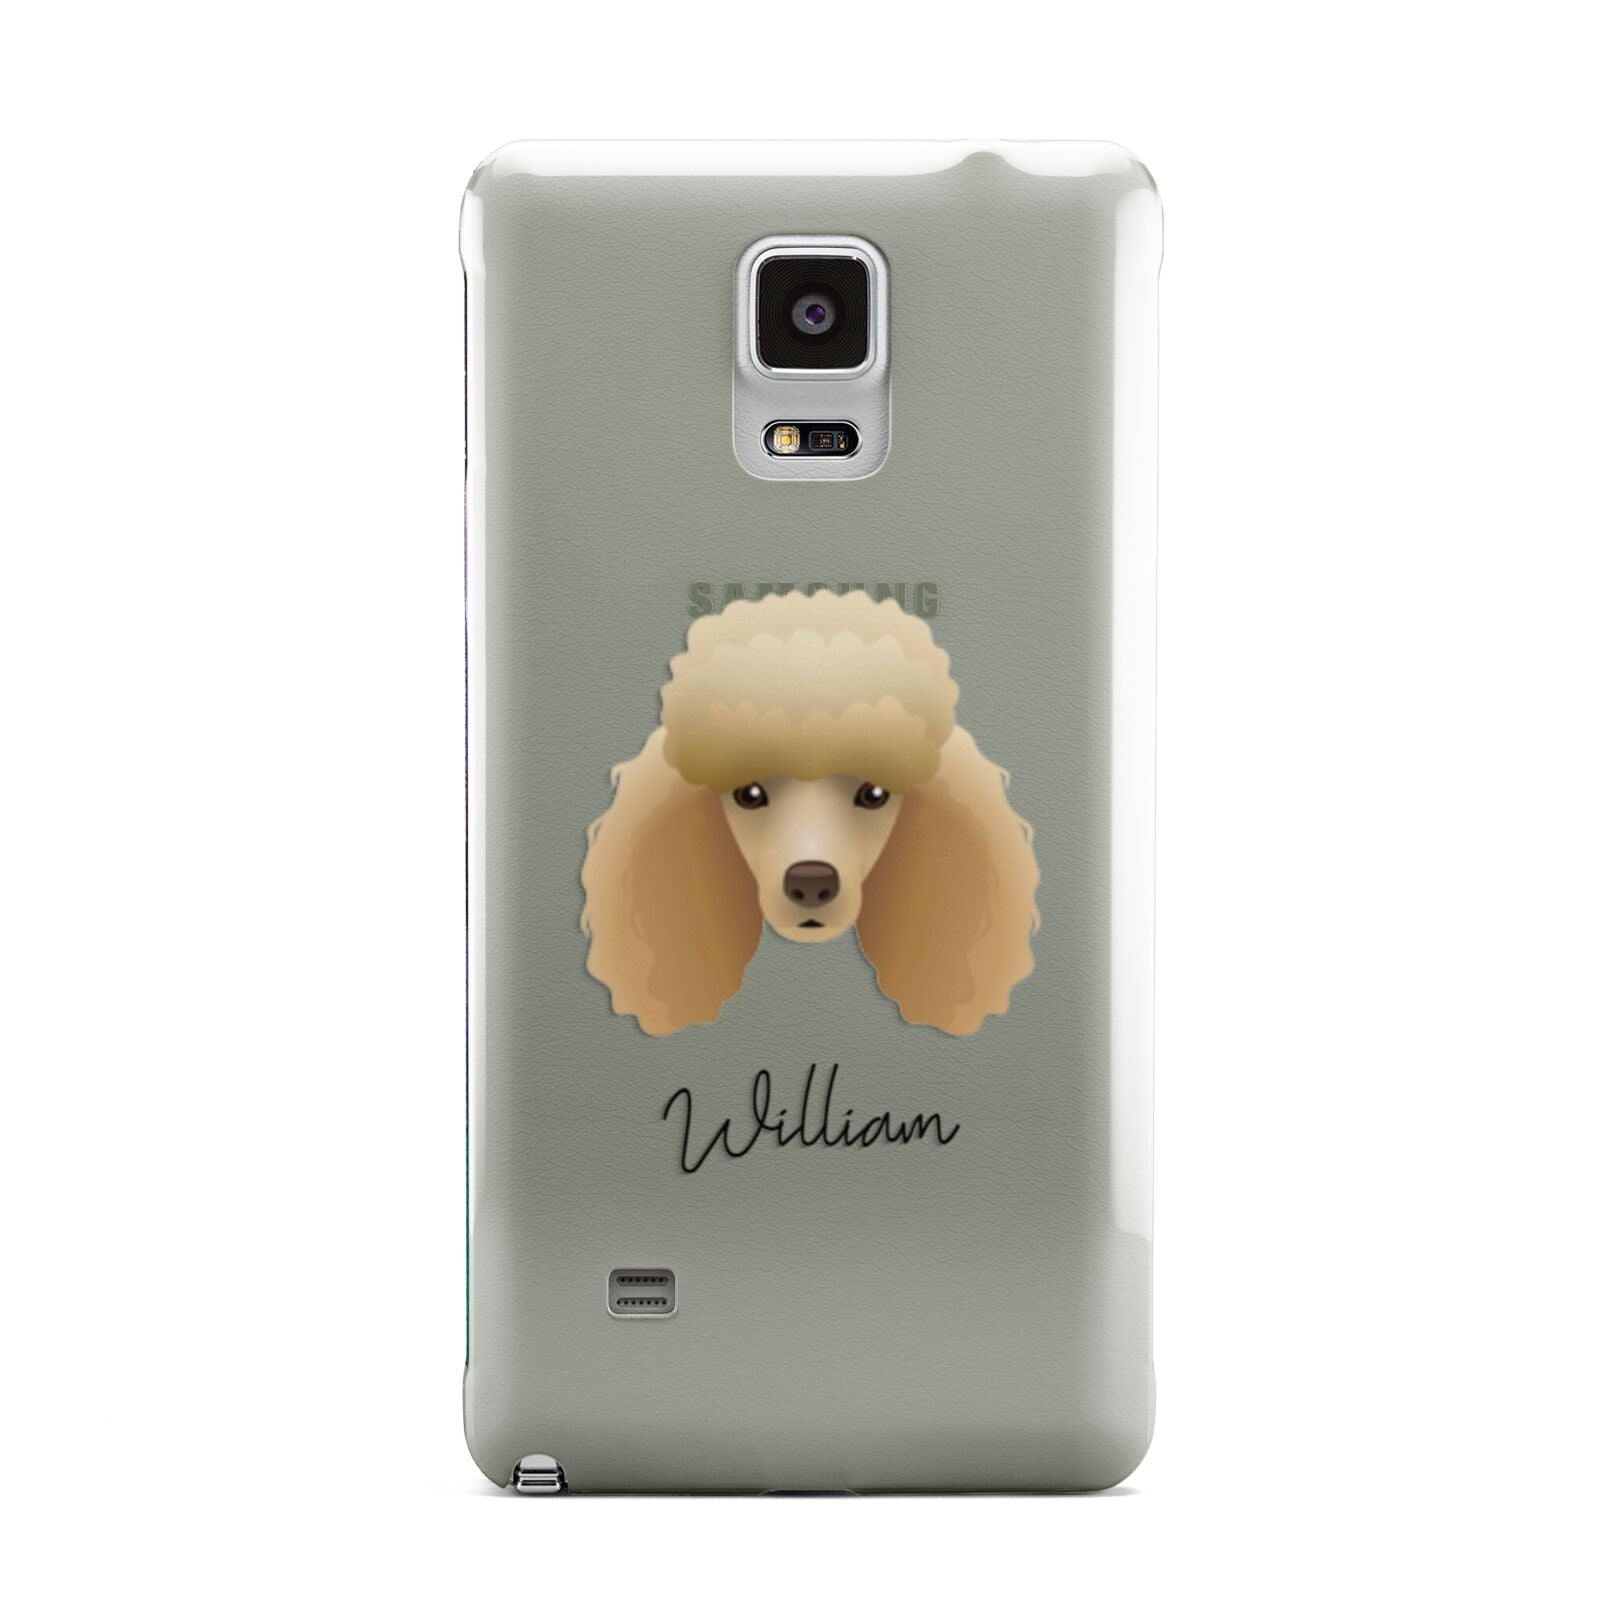 Miniature Poodle Personalised Samsung Galaxy Note 4 Case